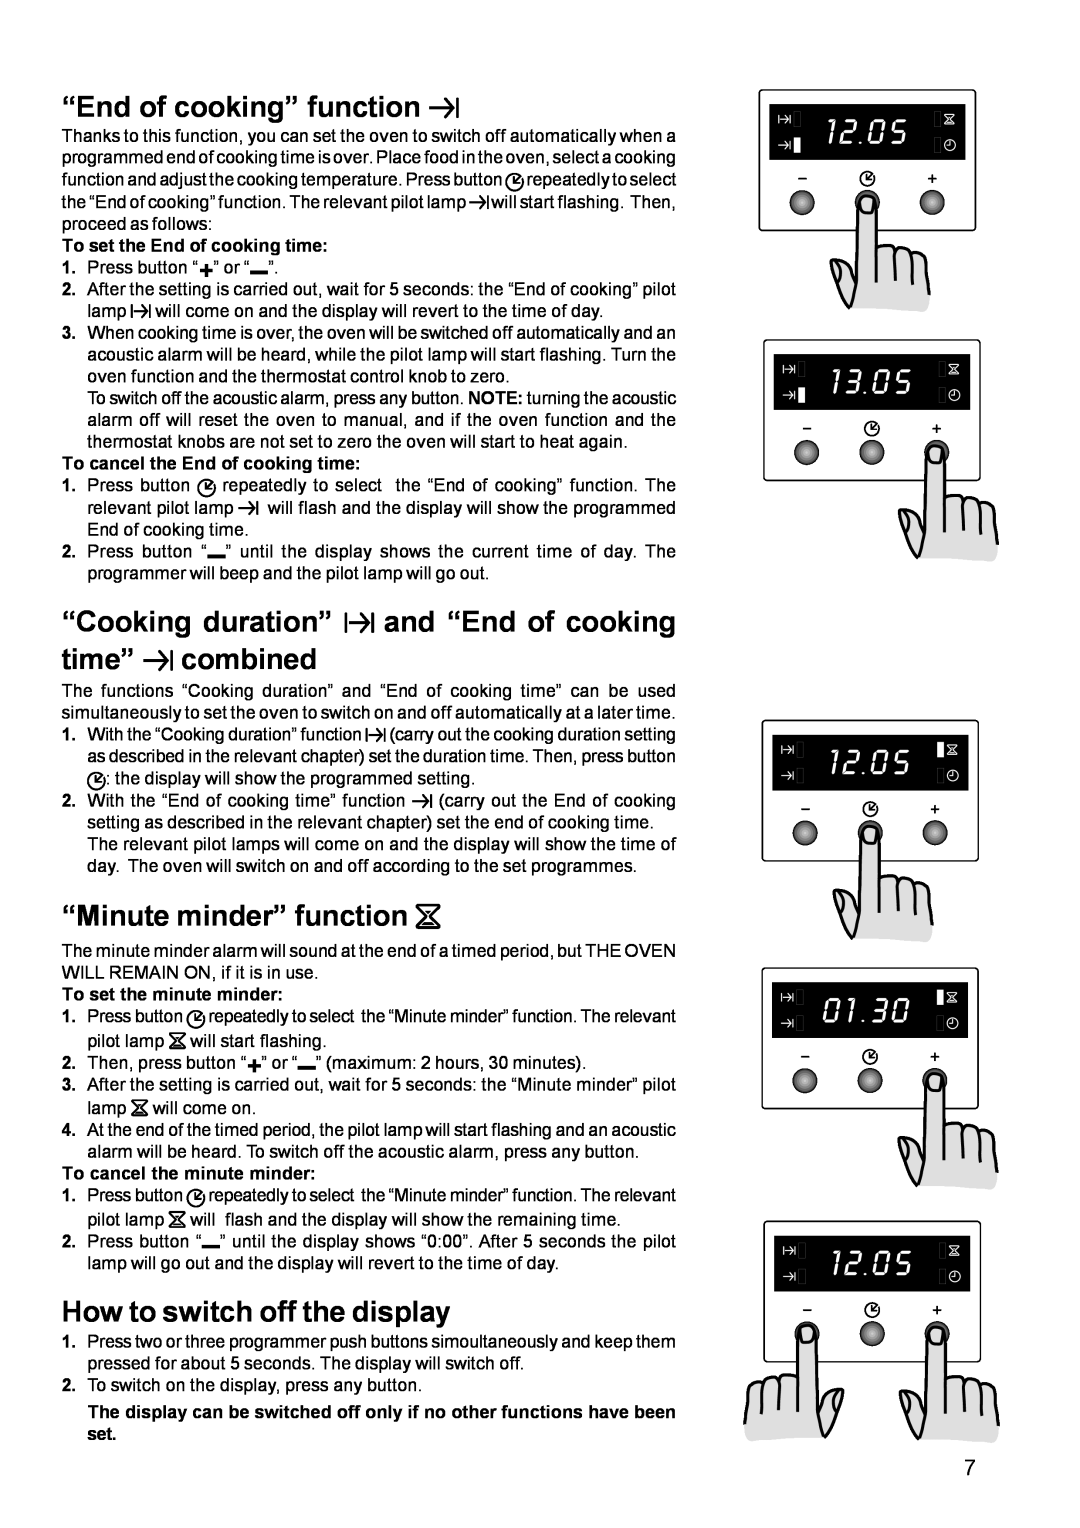 Zanussi ZBQ 365 “End of cooking” function, “Cooking duration” and “End of cooking time” combined, “Minute minder” function 